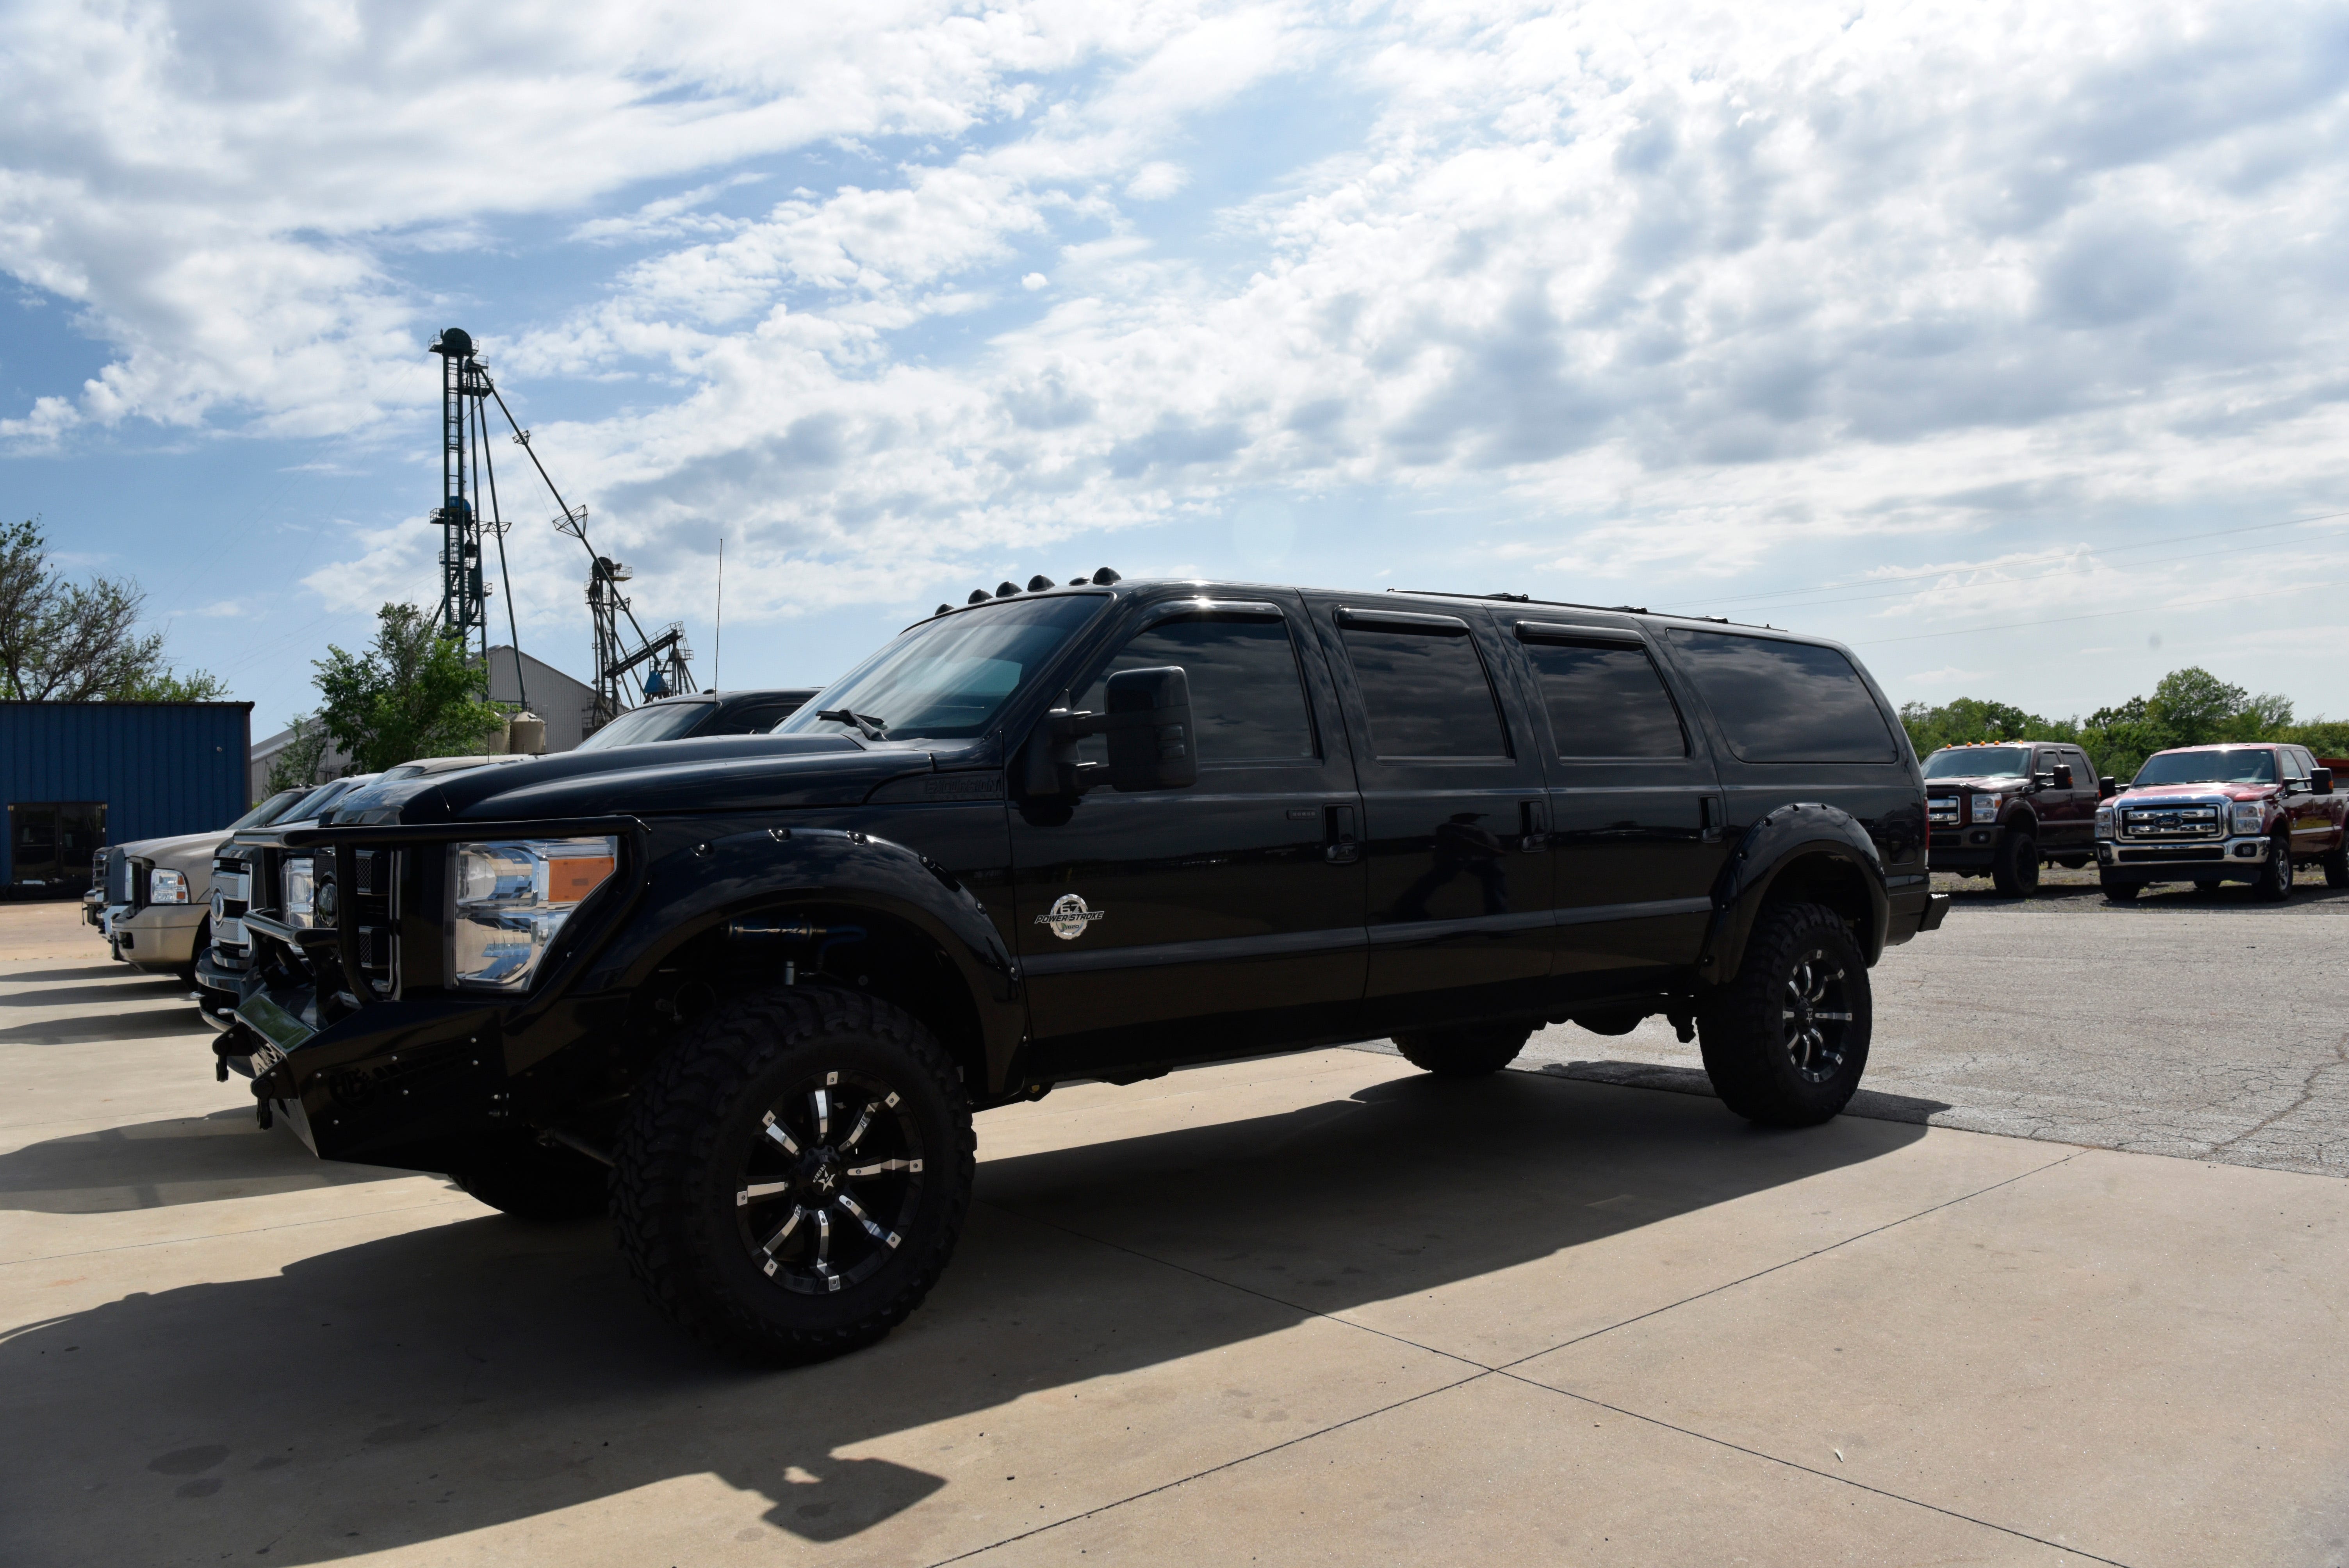 A custom built six-door Ford Excursion sits in the lot at Custom Autos By Tim in Guthrie, Oklahoma on April 26, 2019.